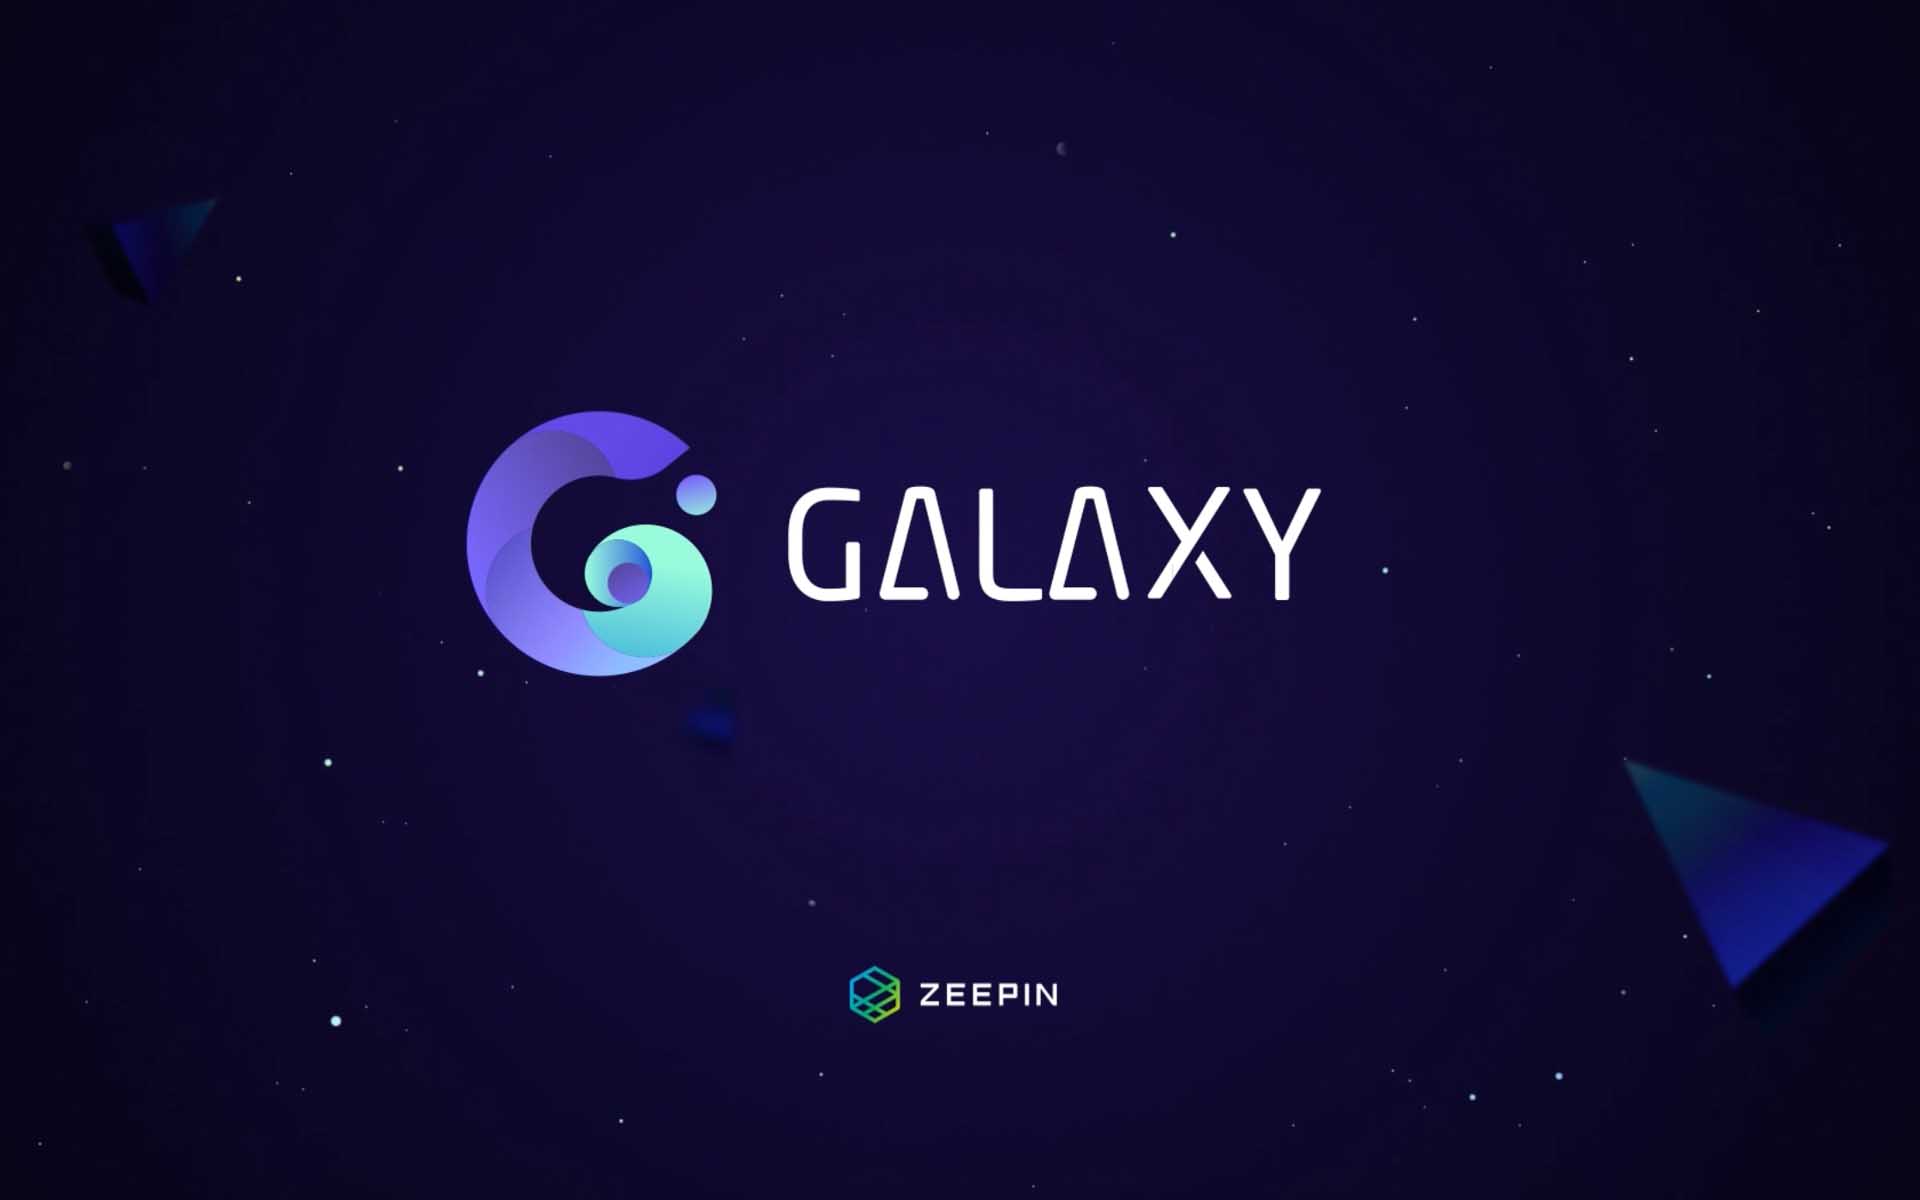 Zeepin Has Created the First Virtual Universe Powered by Blockchain - CryptoGalaxy